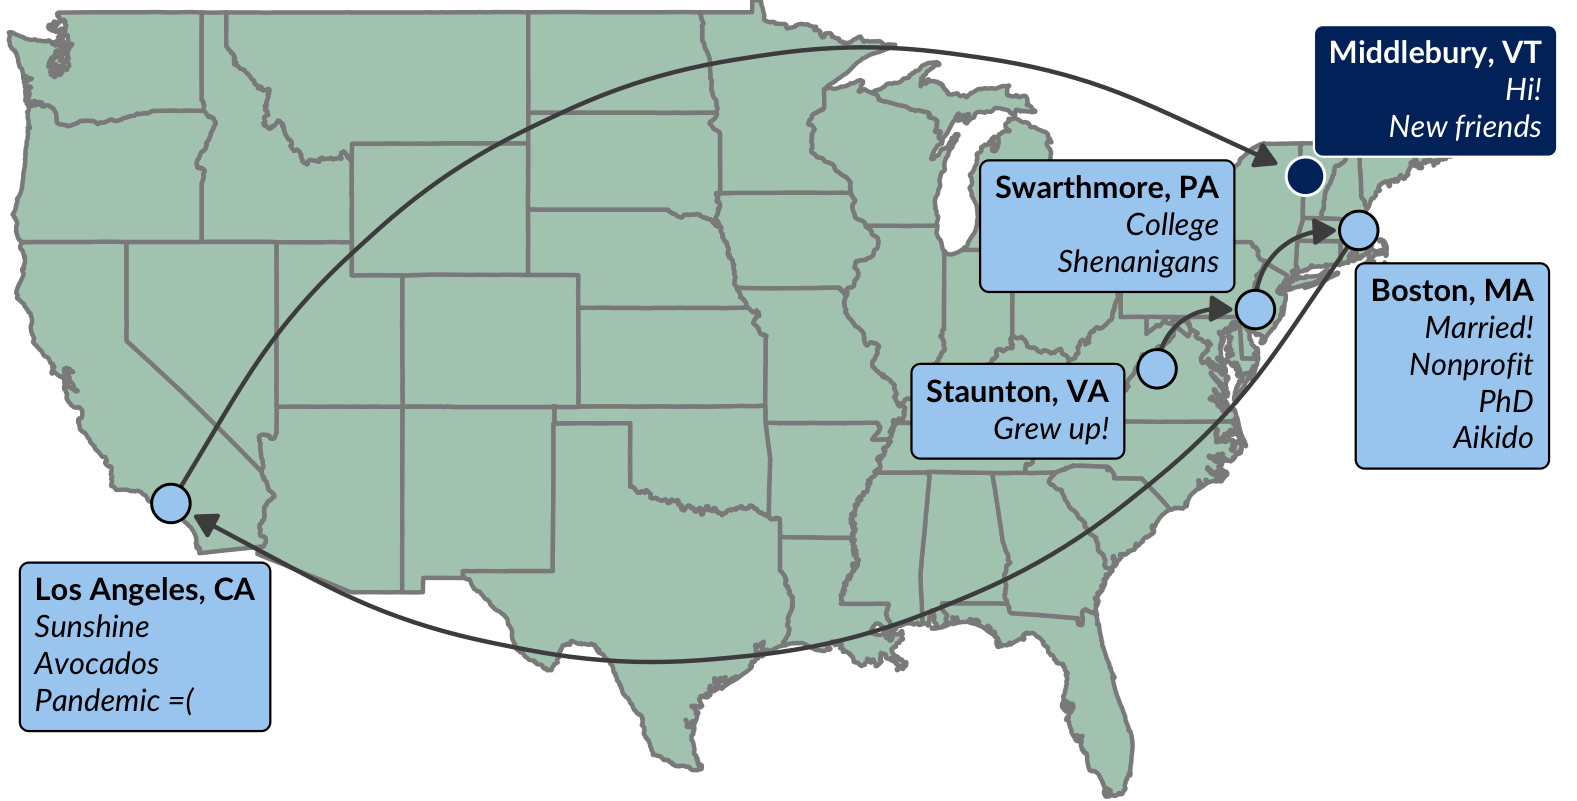 A map of the contiguous US with the following locations joined by sequential arrows: Staunton VA, Swarthmore PA, Boston MA, Los Angeles CA, and Middlebury VT.